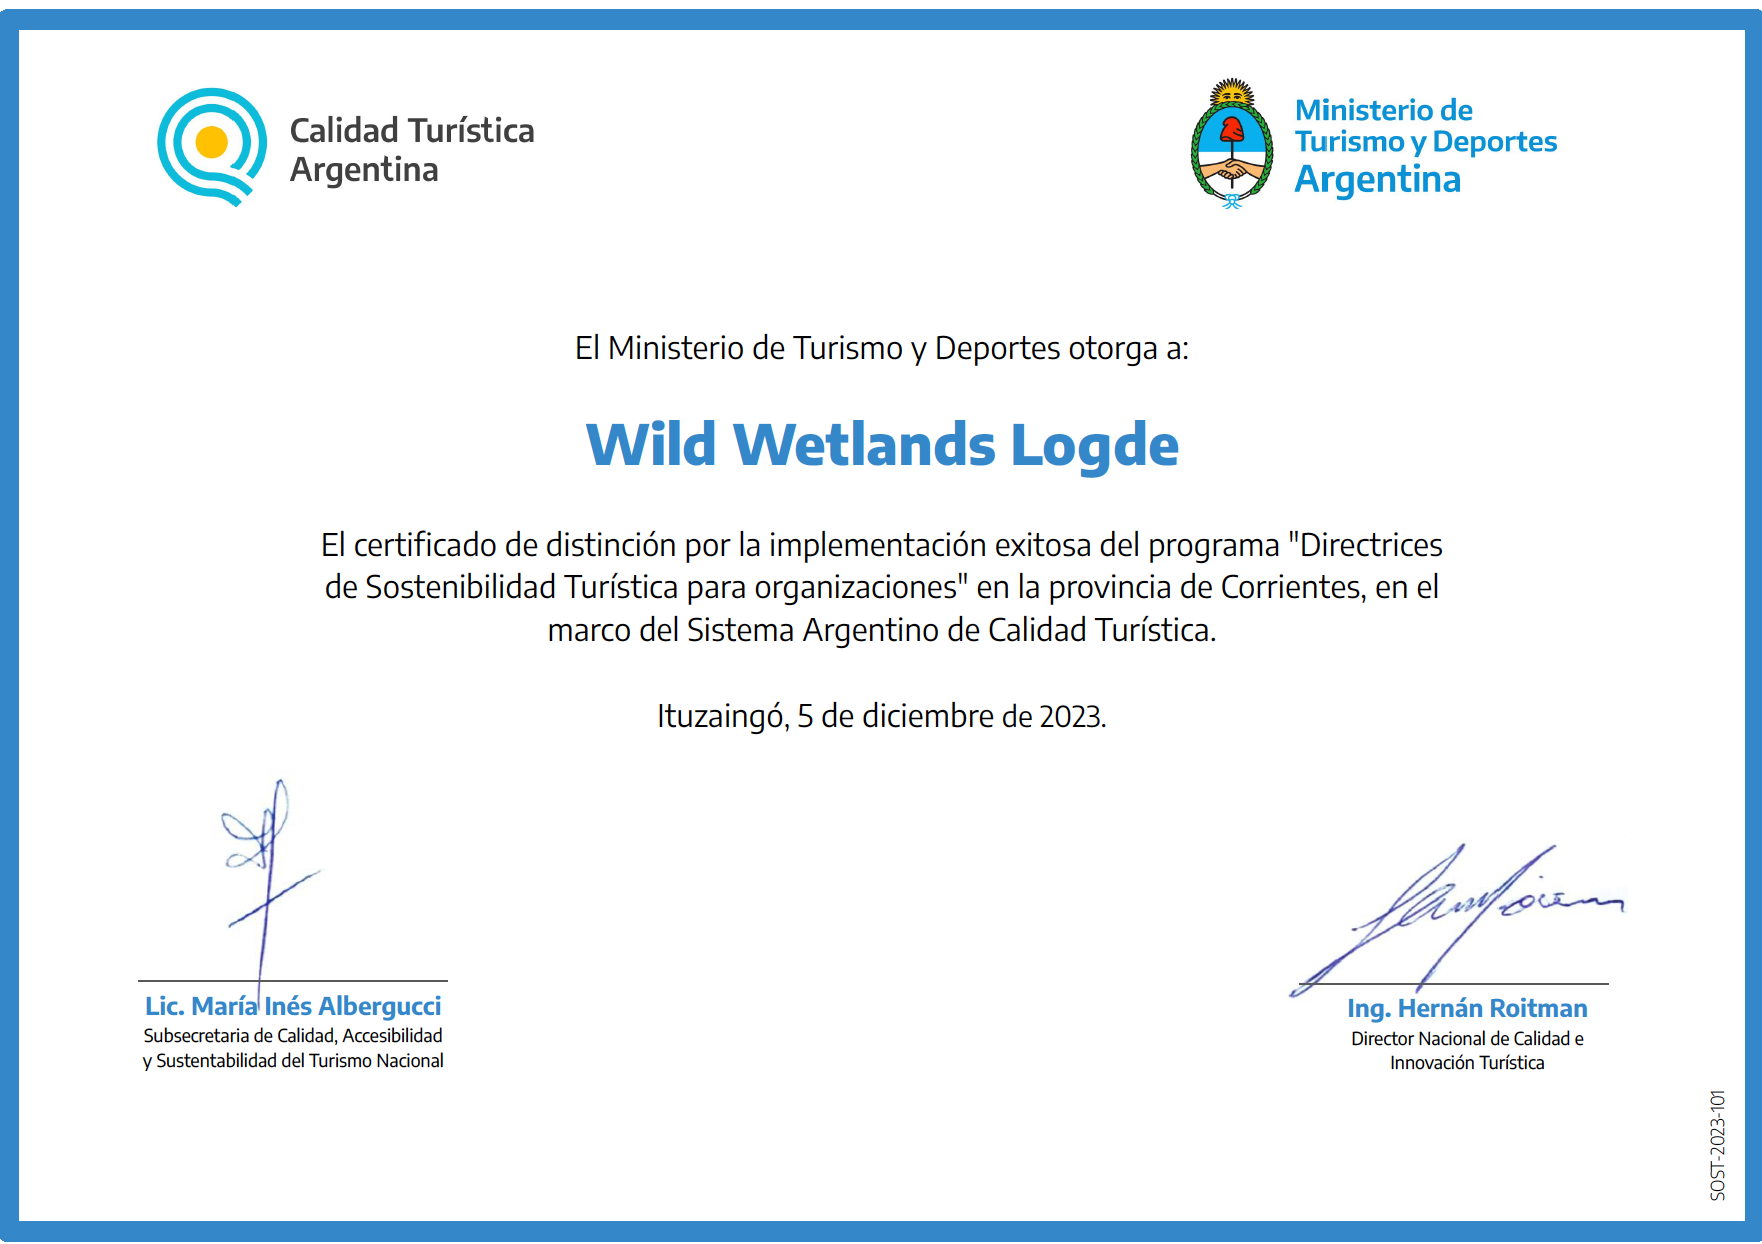 Sustainability Certificate for Wild Wetlands